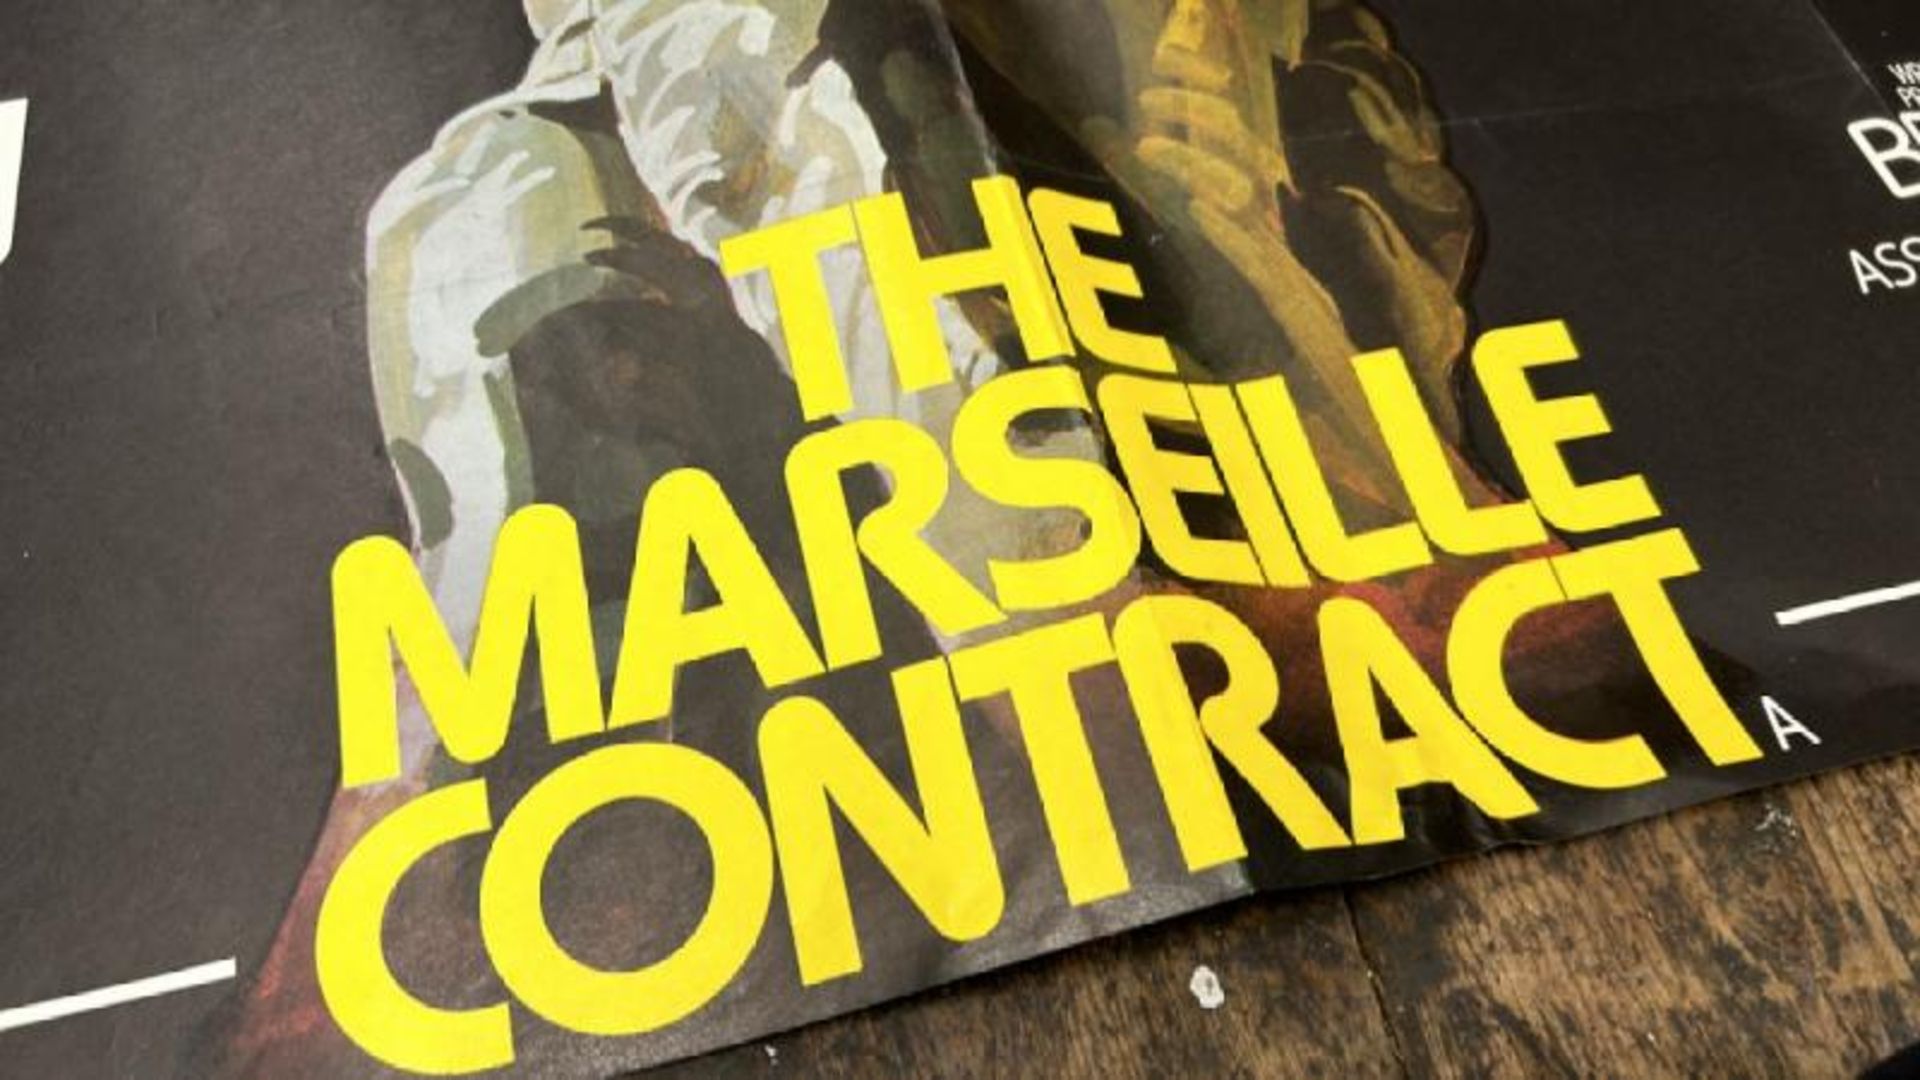 THE MARSEILLE CONTRACT STARRING MICHAEL CAINE, ANTHONY QUINN, JAMES MASON, ORIGINAL FILM POSTER, - Image 2 of 5